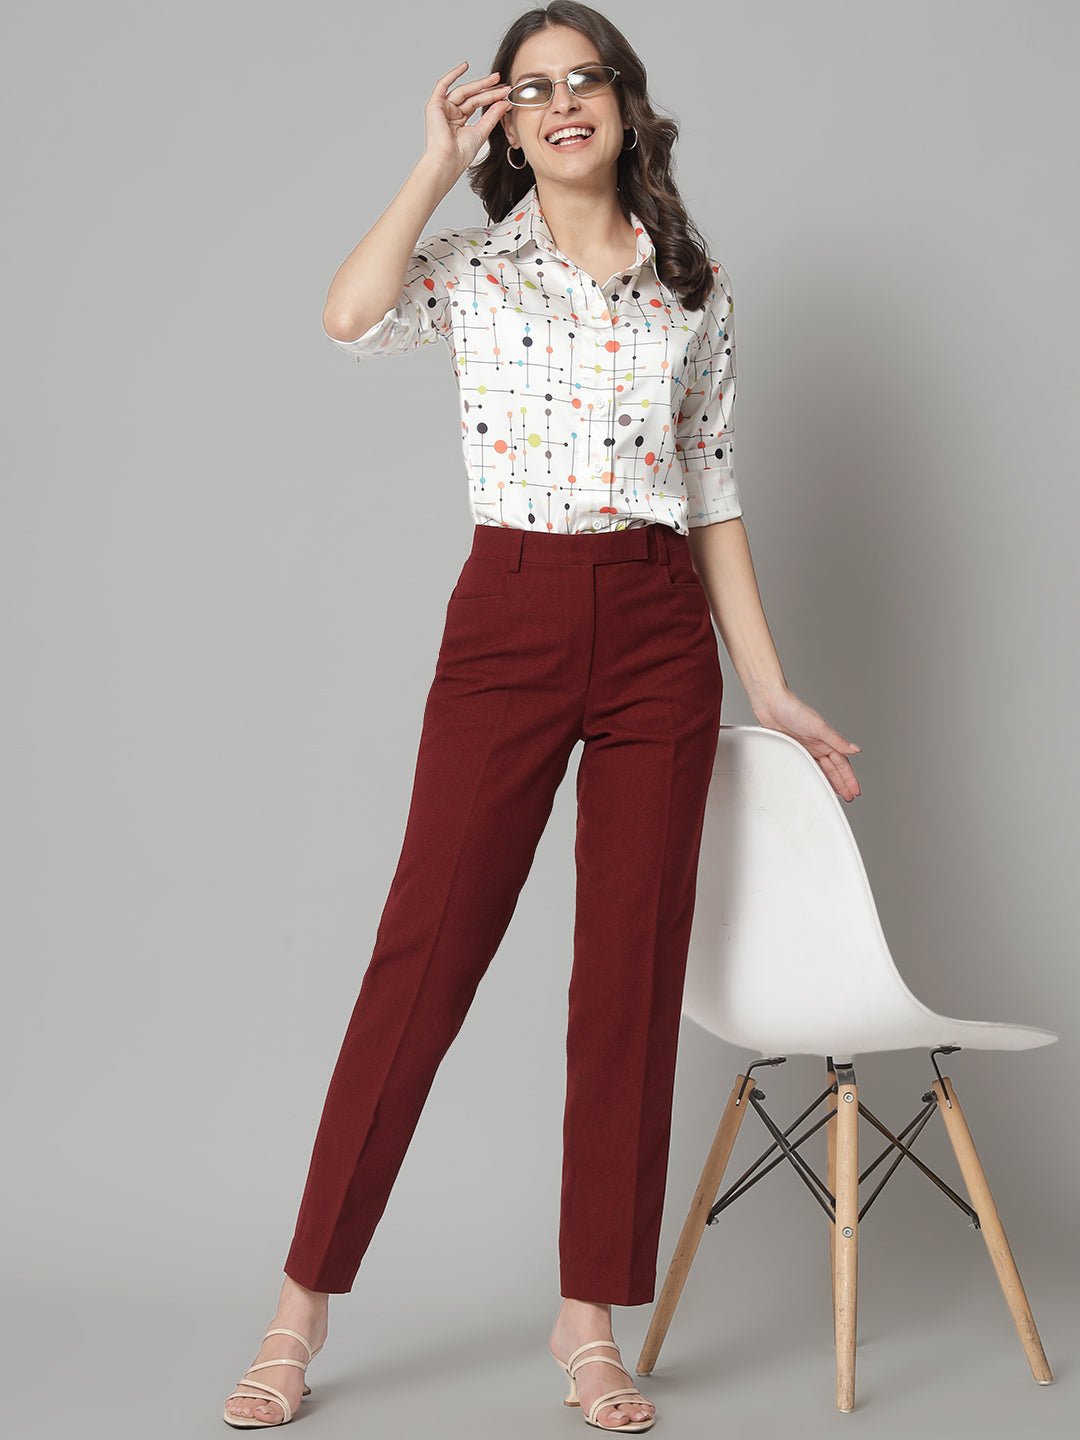 Womens Formal Pants Outfits